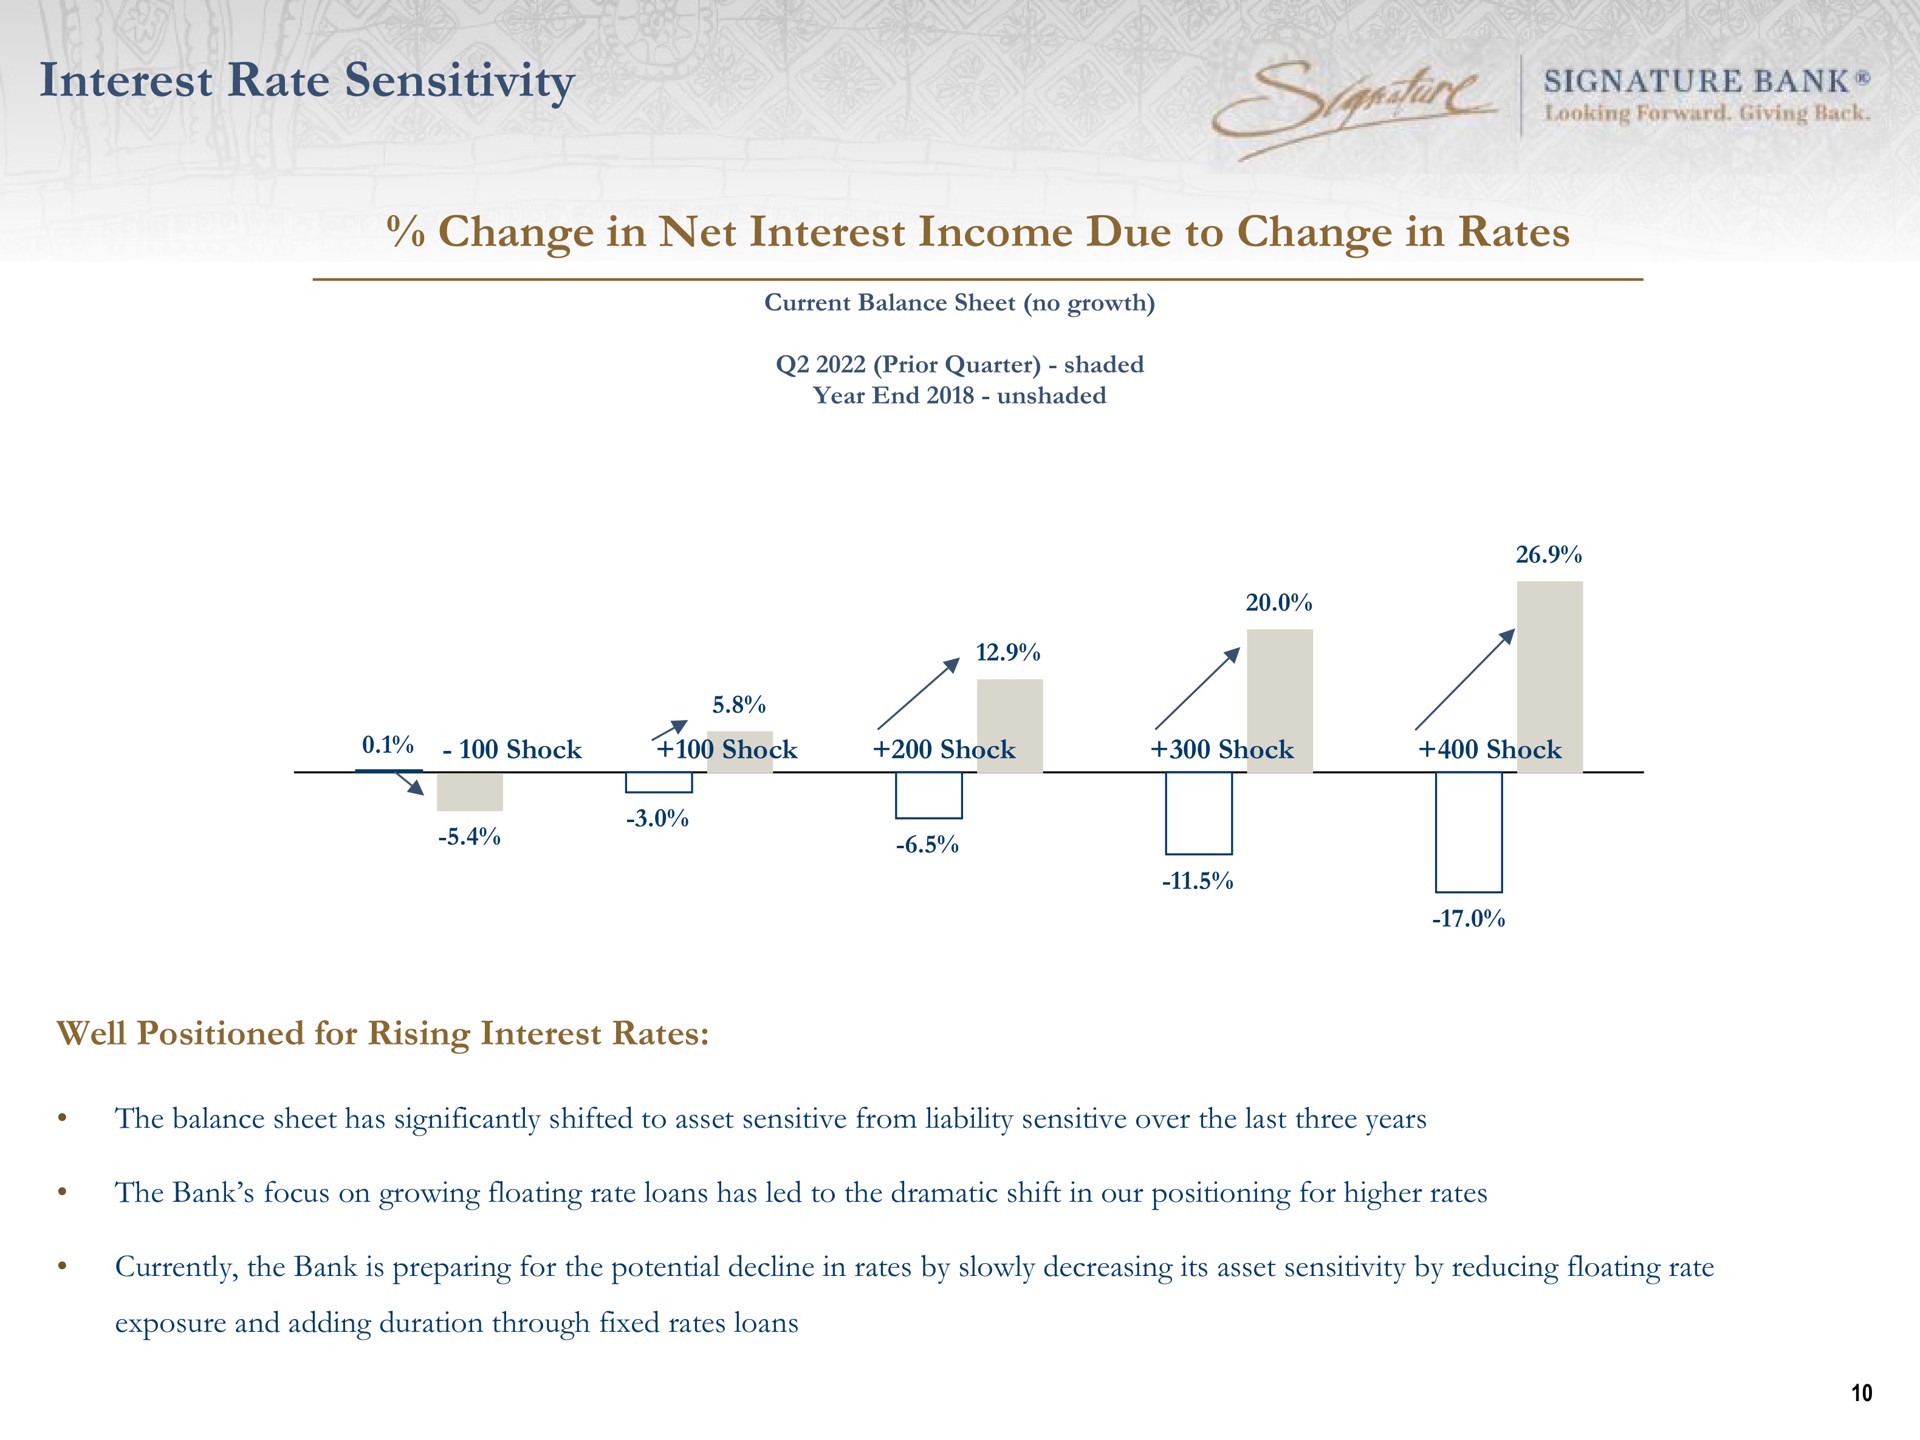 interest rate sensitivity change in net interest income due to change in rates a spot signature bank shock shock shock a well positioned for rising | Signature Bank